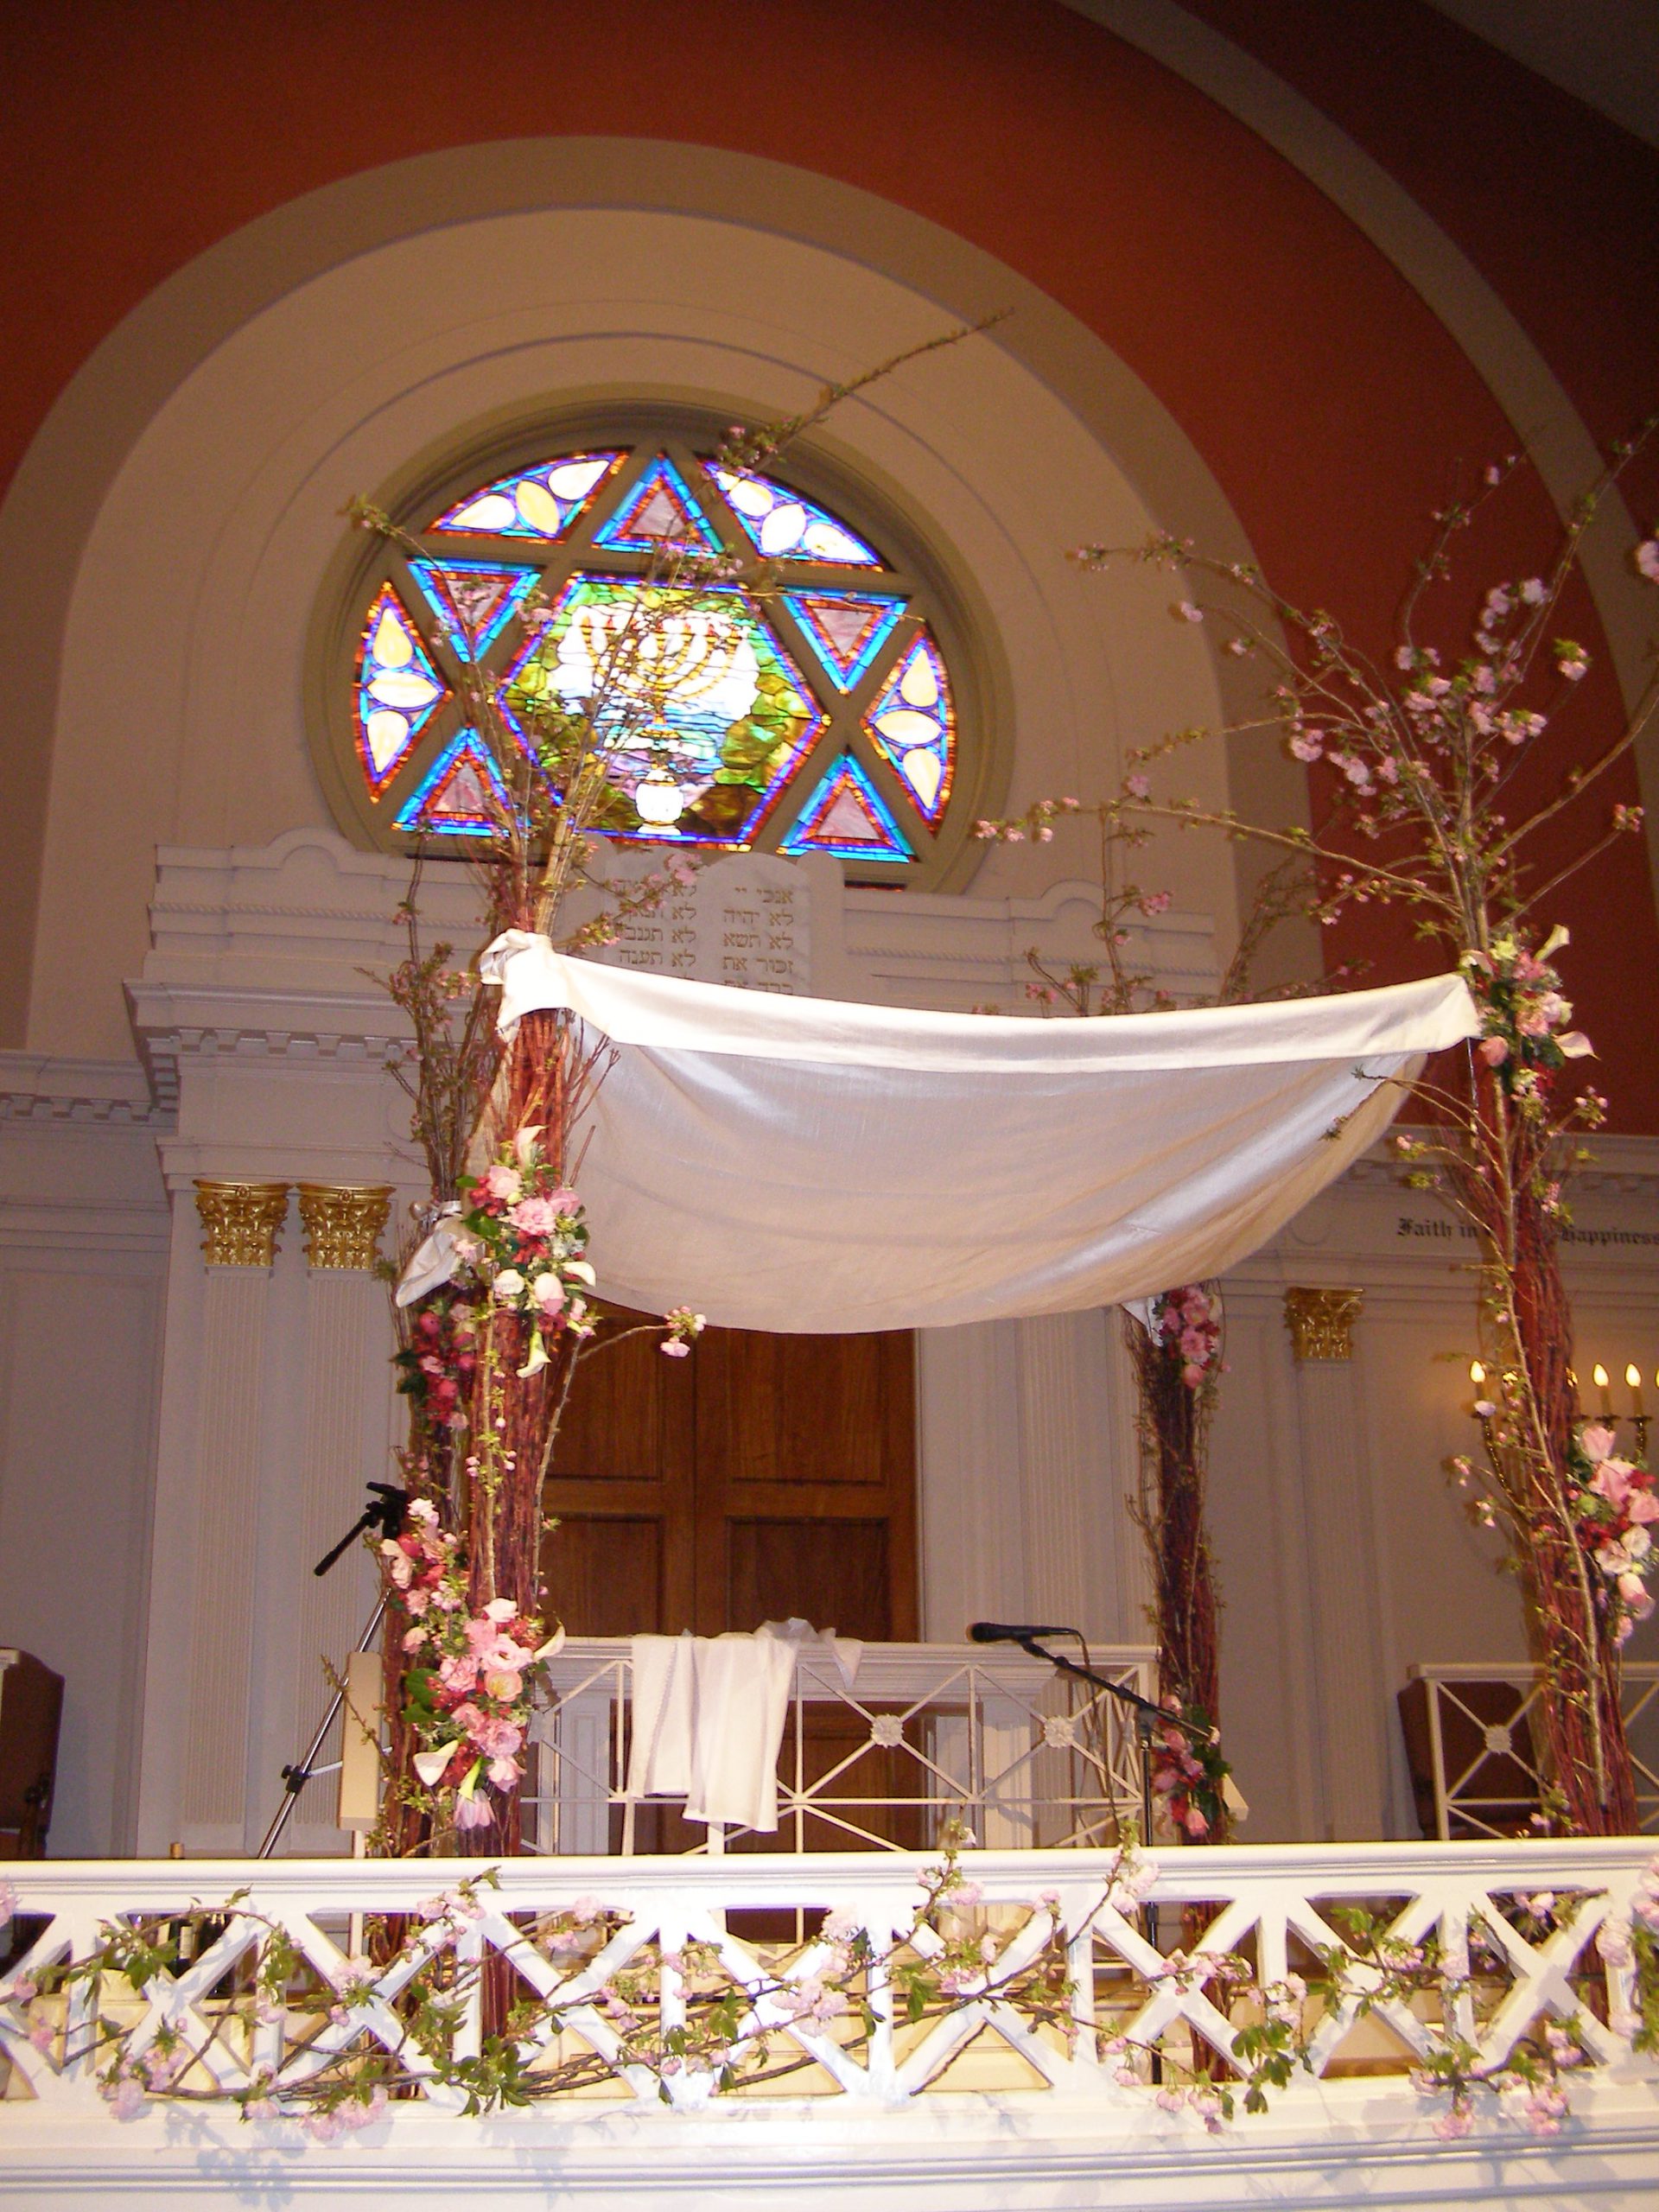 Will there be marriage under the chuppah after the resurrection?